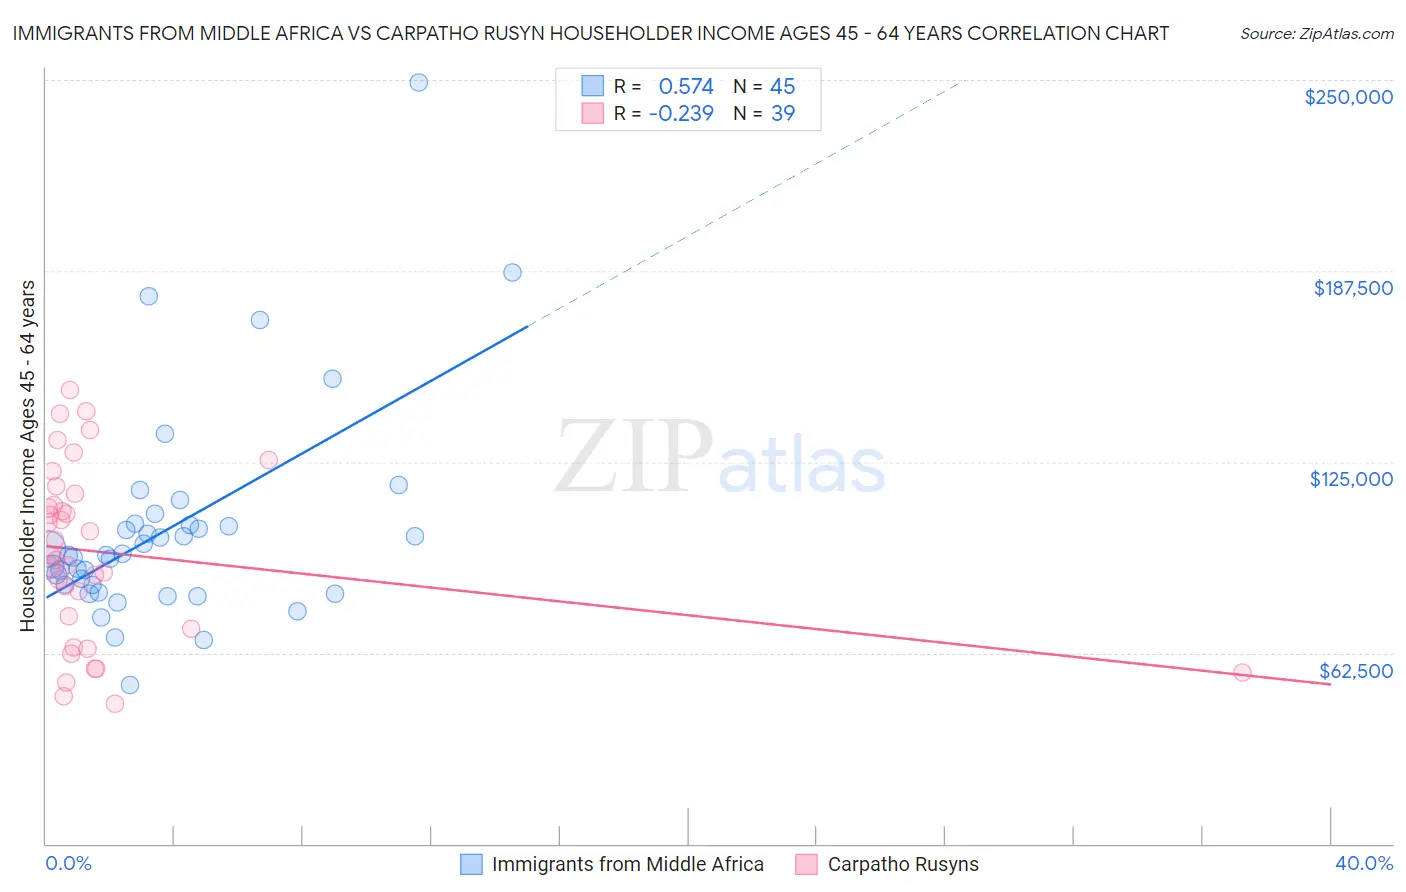 Immigrants from Middle Africa vs Carpatho Rusyn Householder Income Ages 45 - 64 years